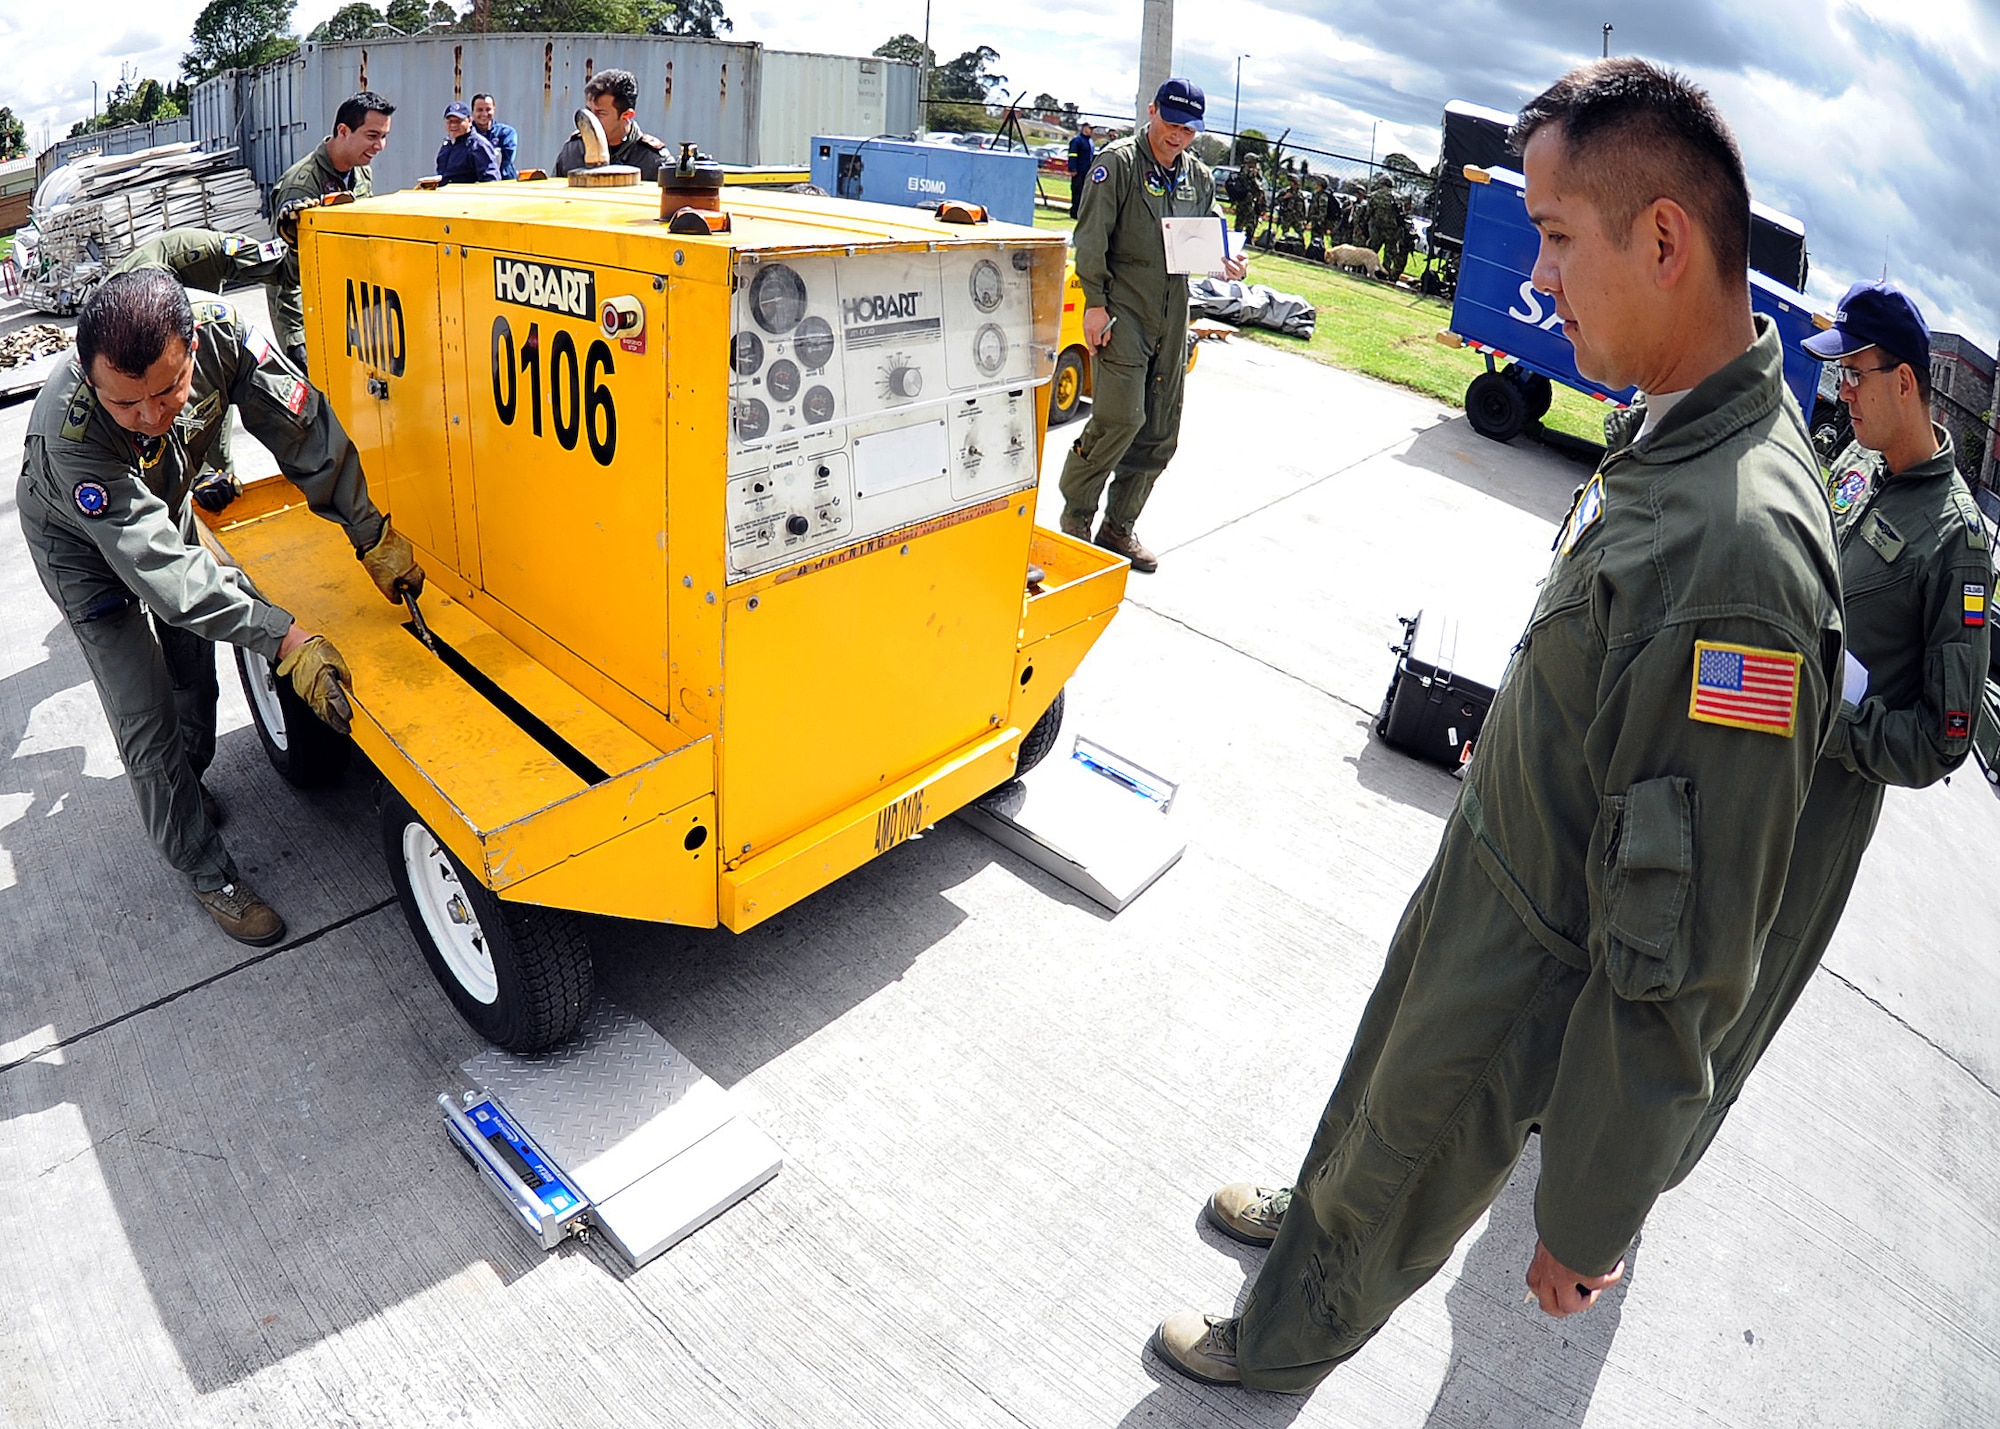 Staff Sgt. Jorge Borges, 571st Mobility Support Advisory Squadron loadmaster, looks on as members of the Colombian air force roll a generator on to two portable scales to calculate the center of balance of the generator during the hands on pallet build-up seminar June 6 at Commando Aéreo de Transporte Militar, Bogota, Colombia.  (U.S. Air Force photo by Tech. Sgt. Lesley Waters)